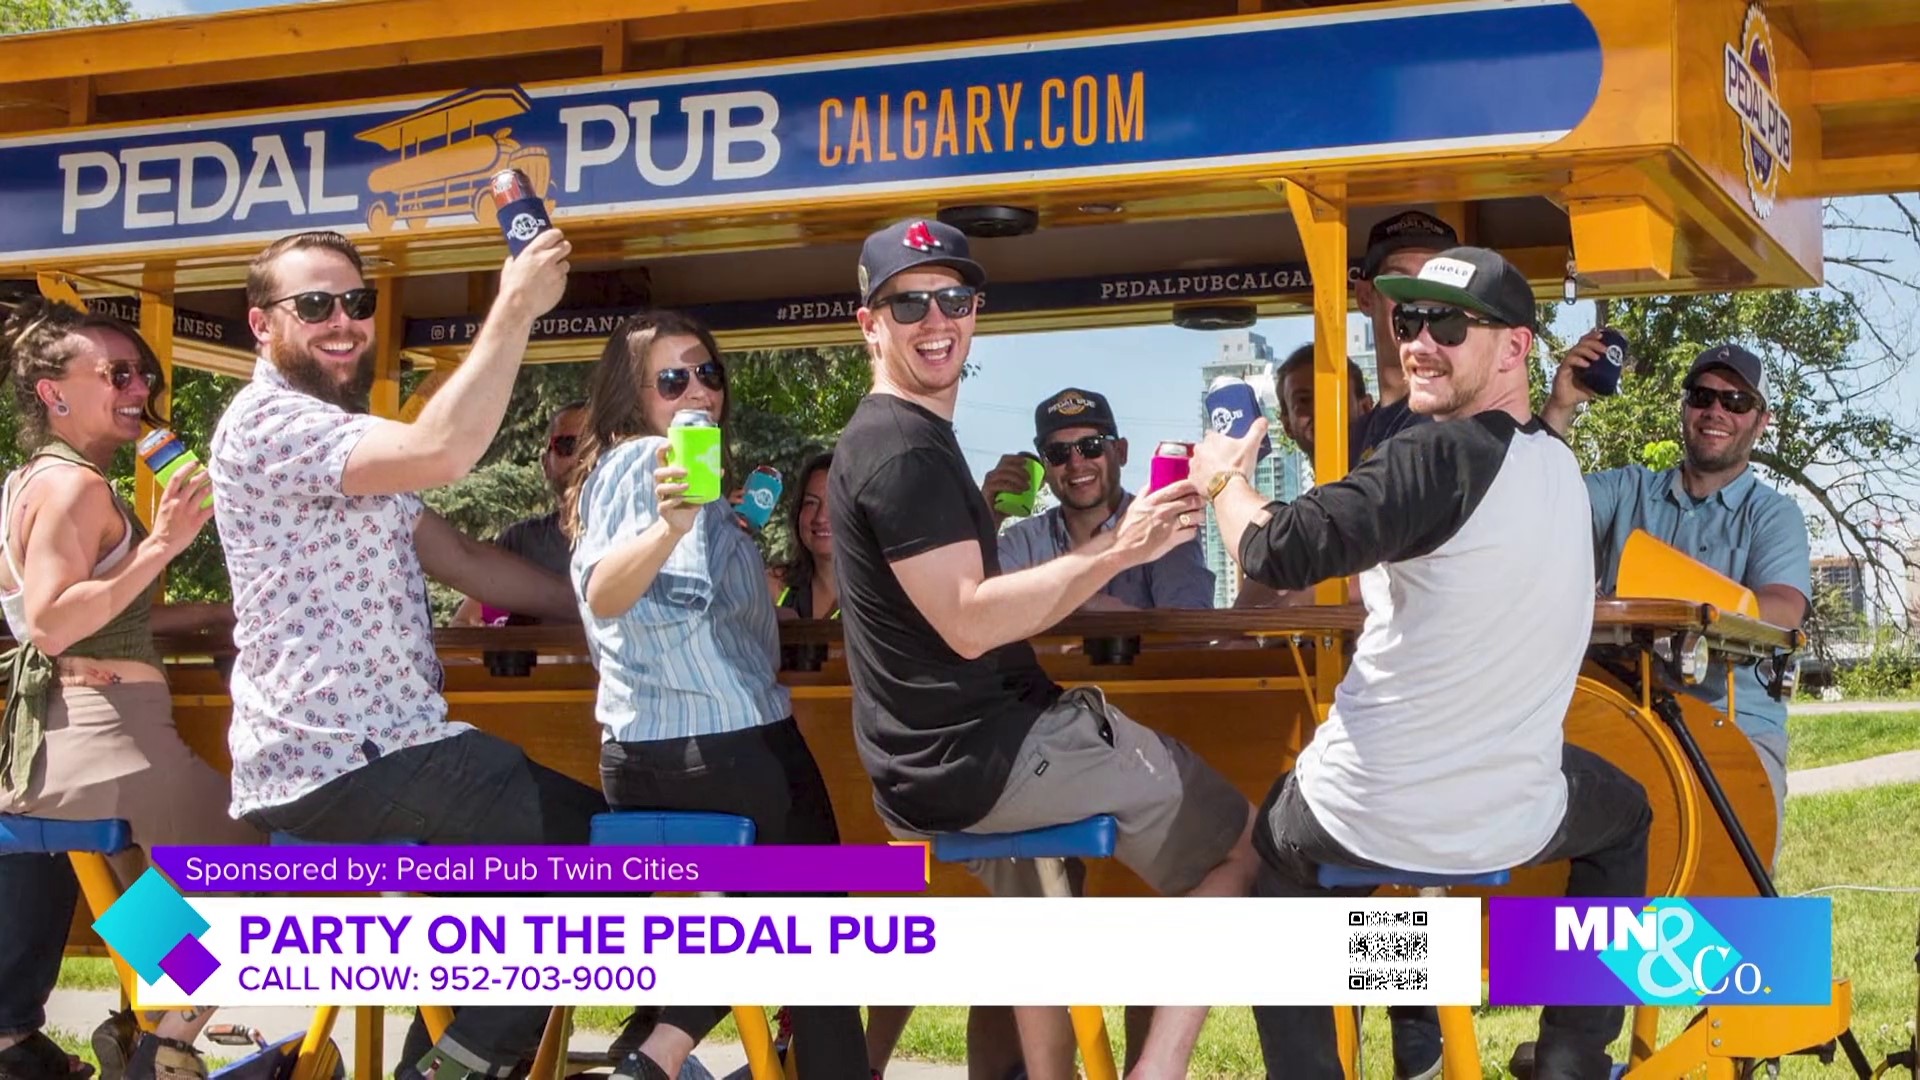 In this paid segment, Pedal Pub Twin Cities joins Minnesota and Company to bring a new idea for adventure and fun in the city!